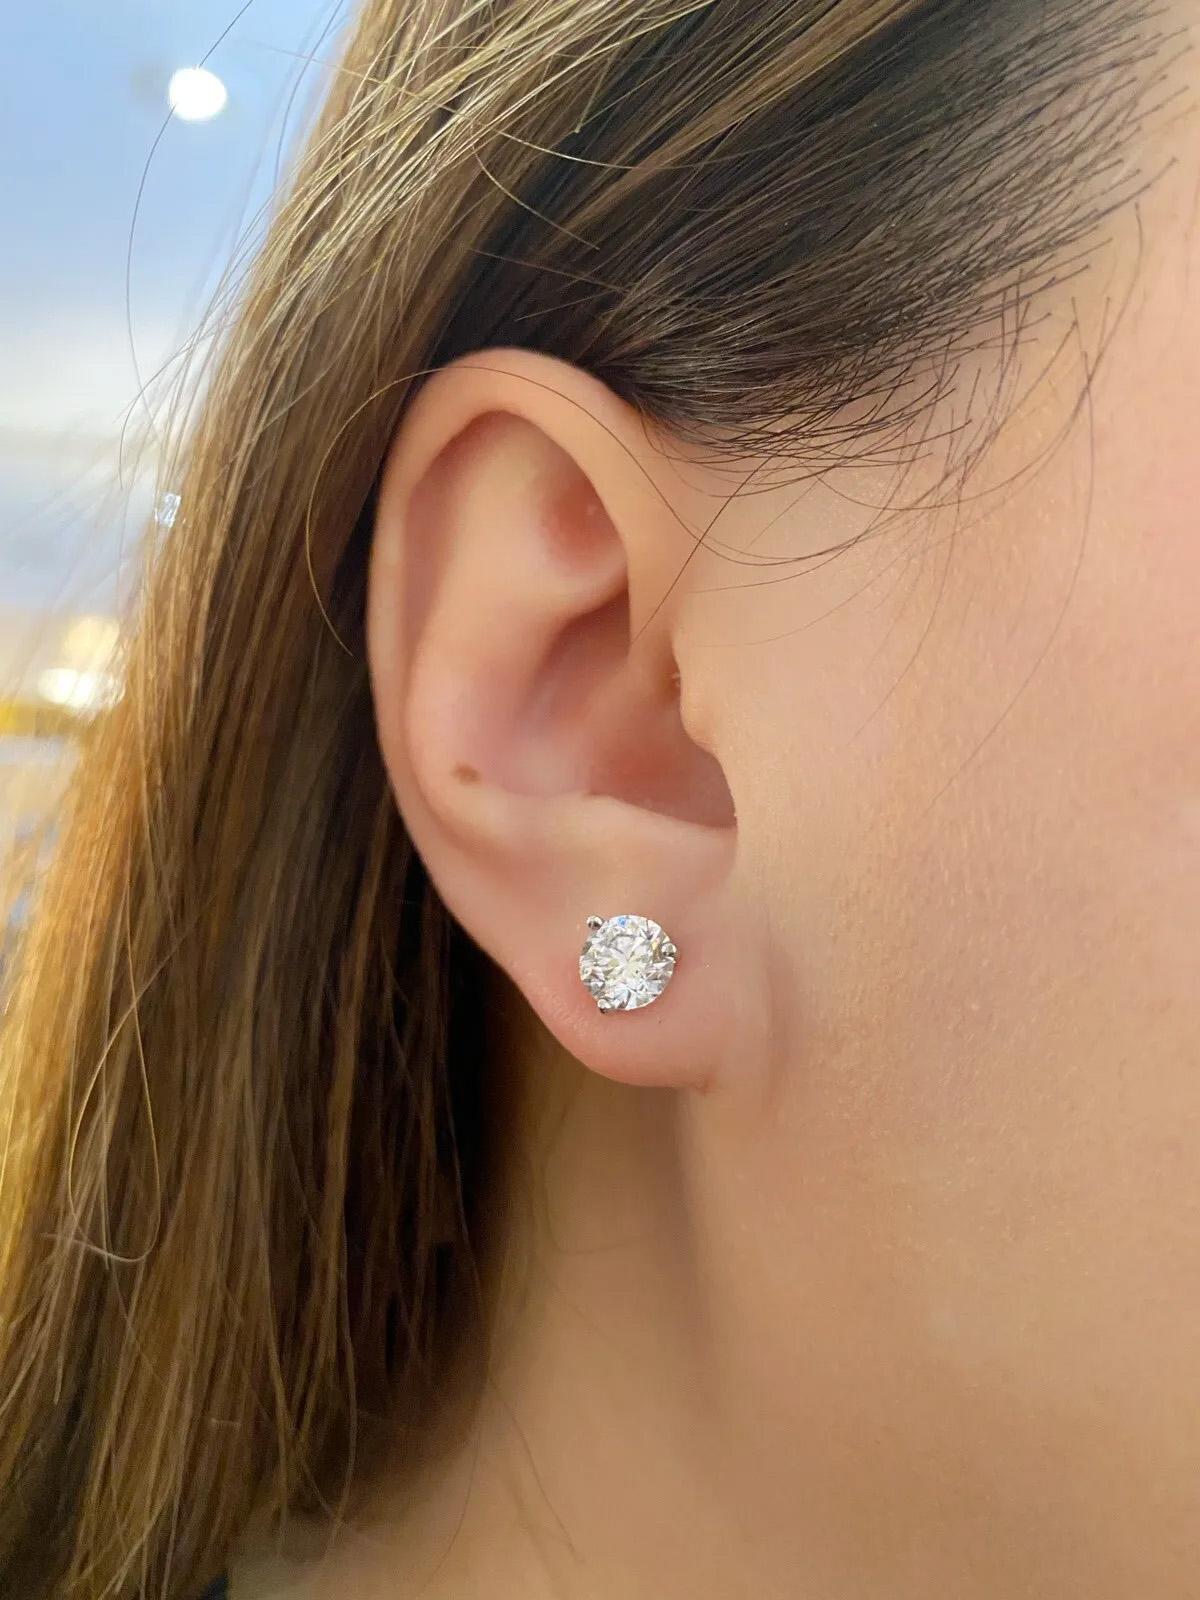 Modern Round Diamond Stud Earrings 2.22 Carats GIA Certified in 18k White Gold For Sale